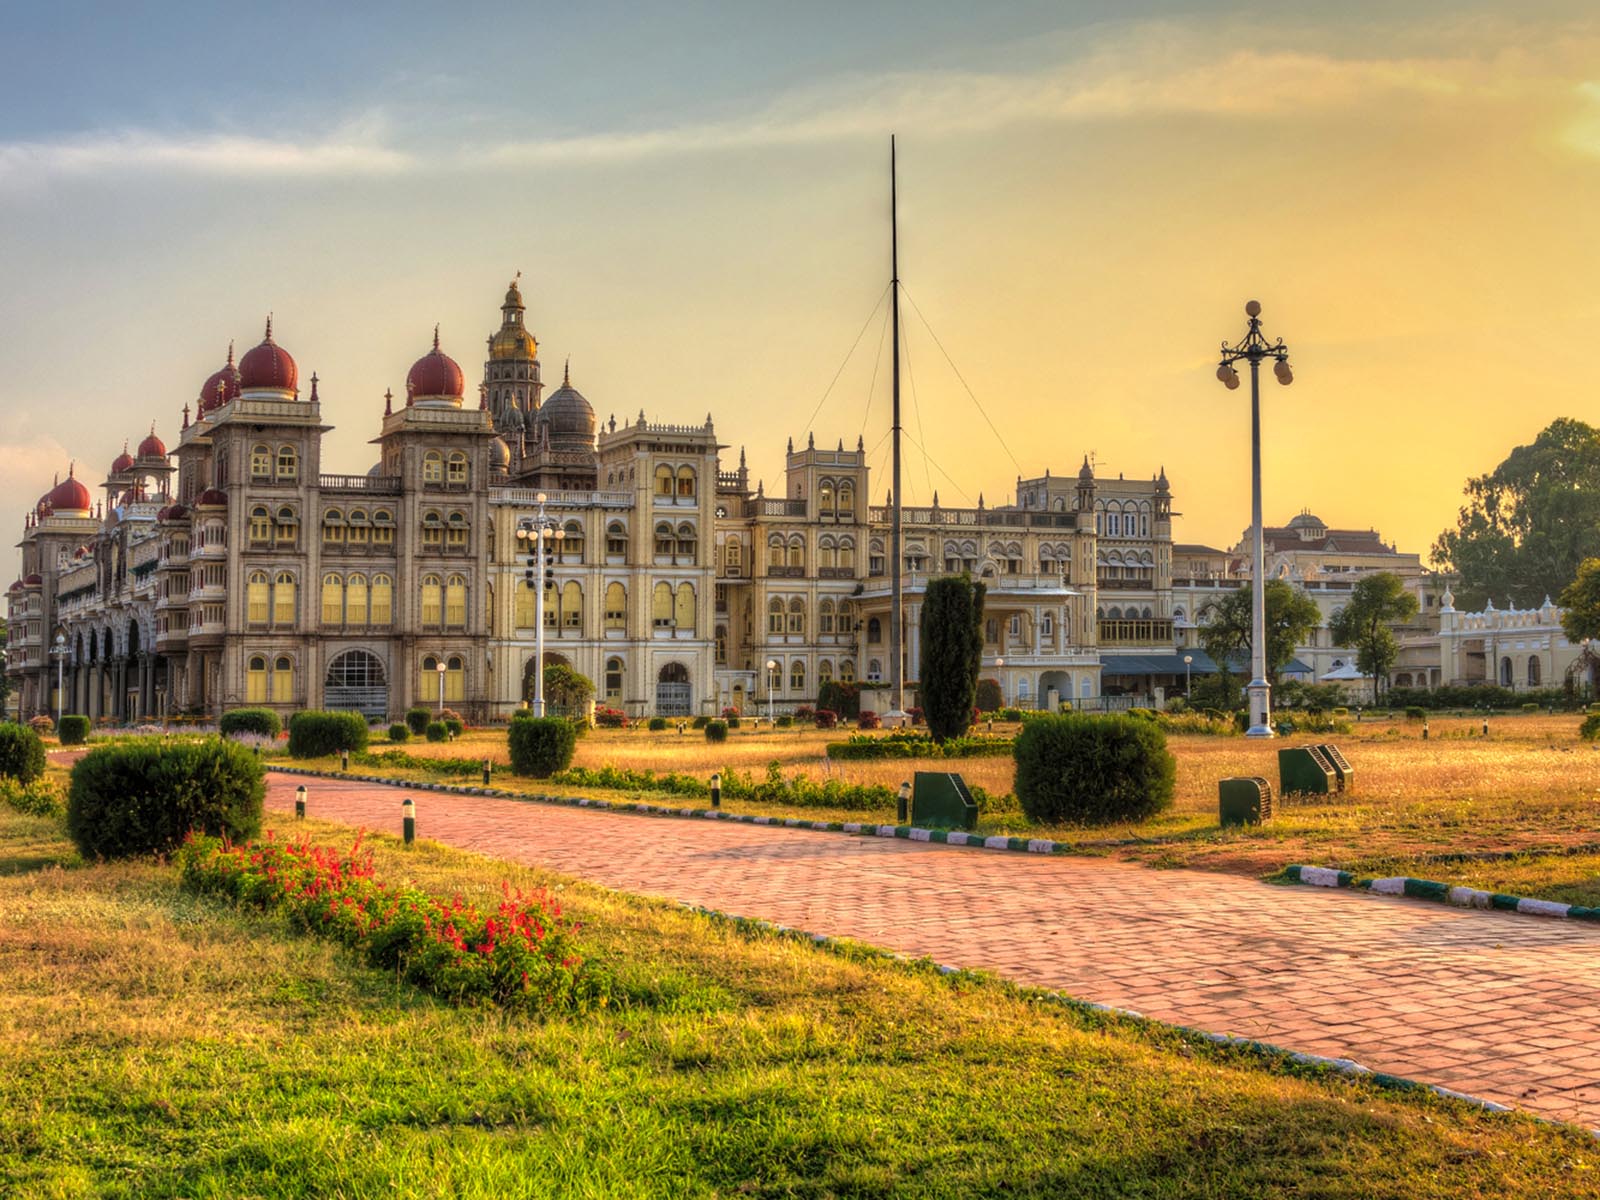 Mysore Palace Famous Palace In India - Tipu Sultan Summer Palace Mysore , HD Wallpaper & Backgrounds